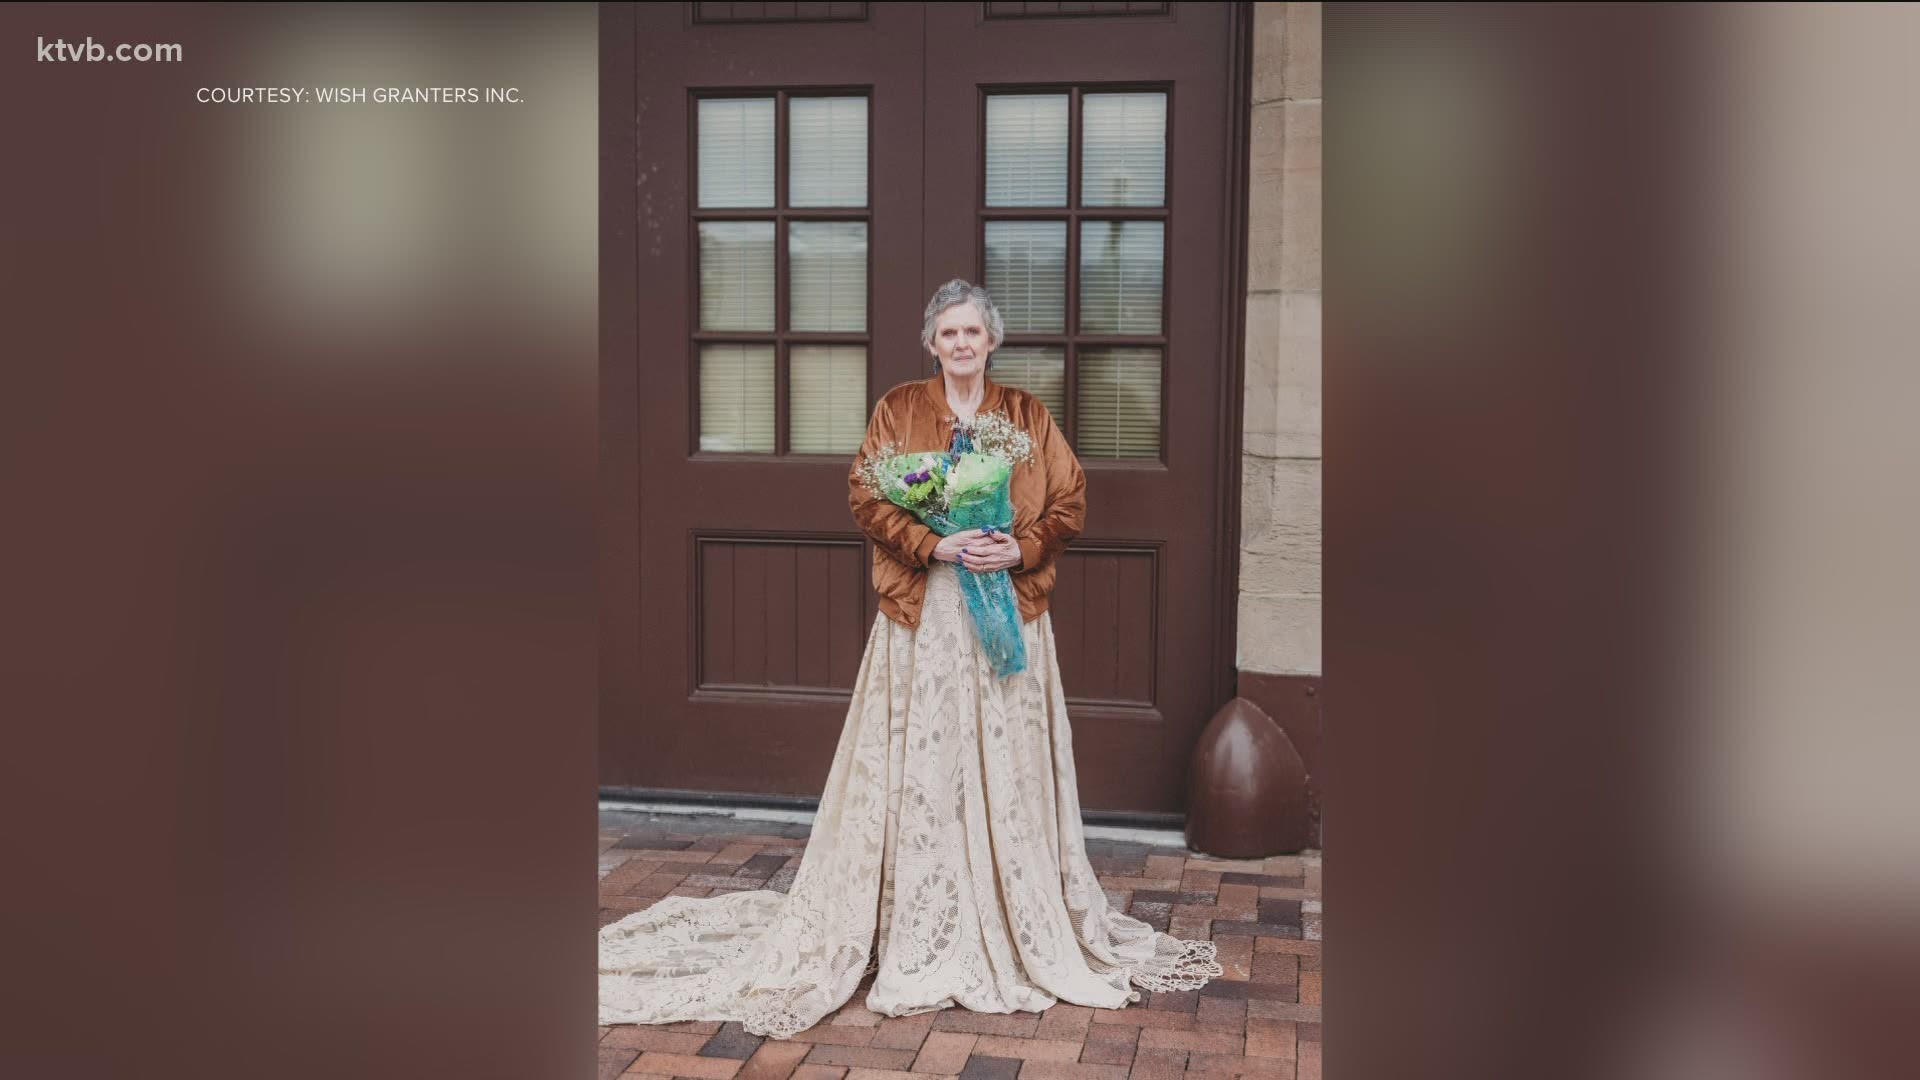 Carolyn's wish was for a glamorous photoshoot to leave lasting, beautiful memories with her husband.